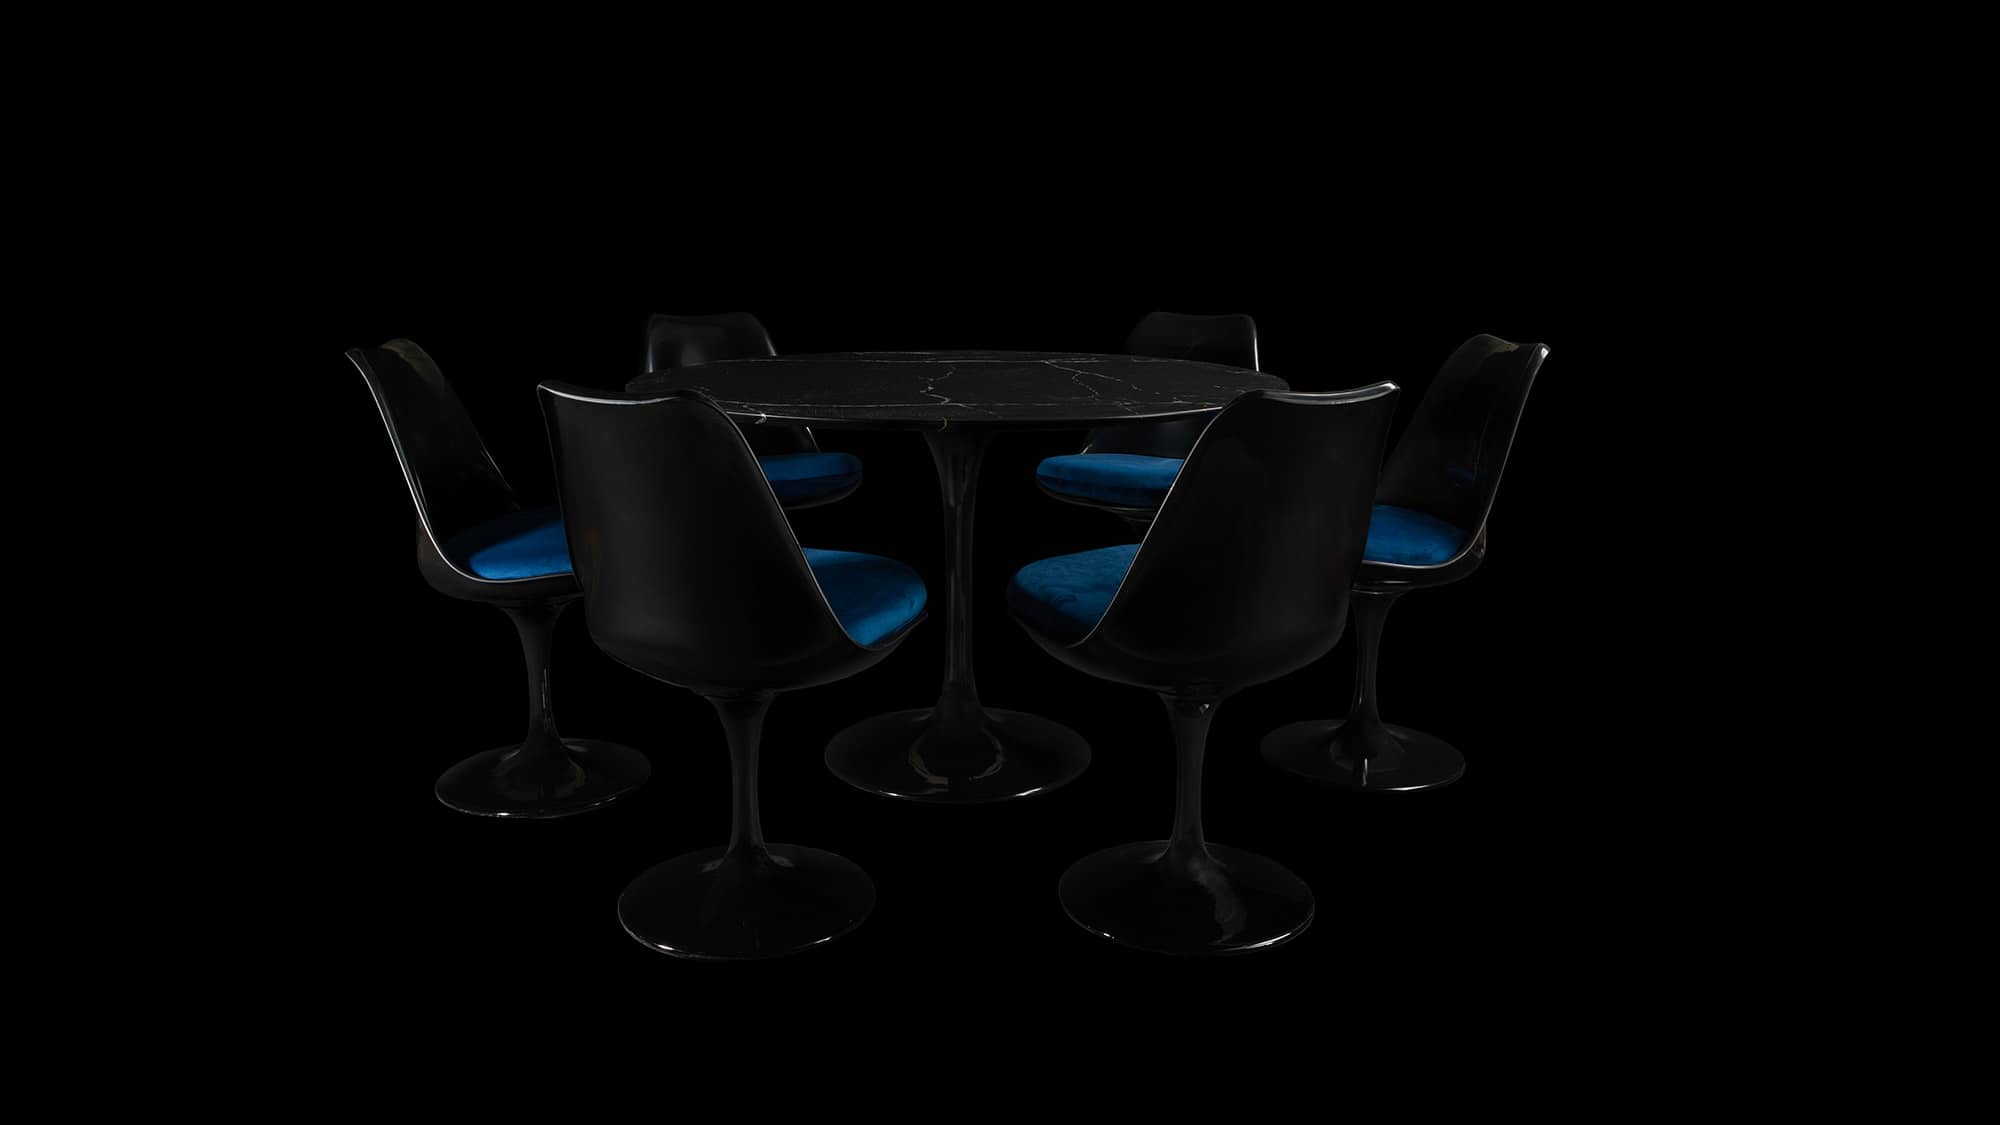 With minimal lighting, a Saarinen Tulip Table in black Marble together with 6 matching Tulip Chairs is barely visible against the black light and backdrop